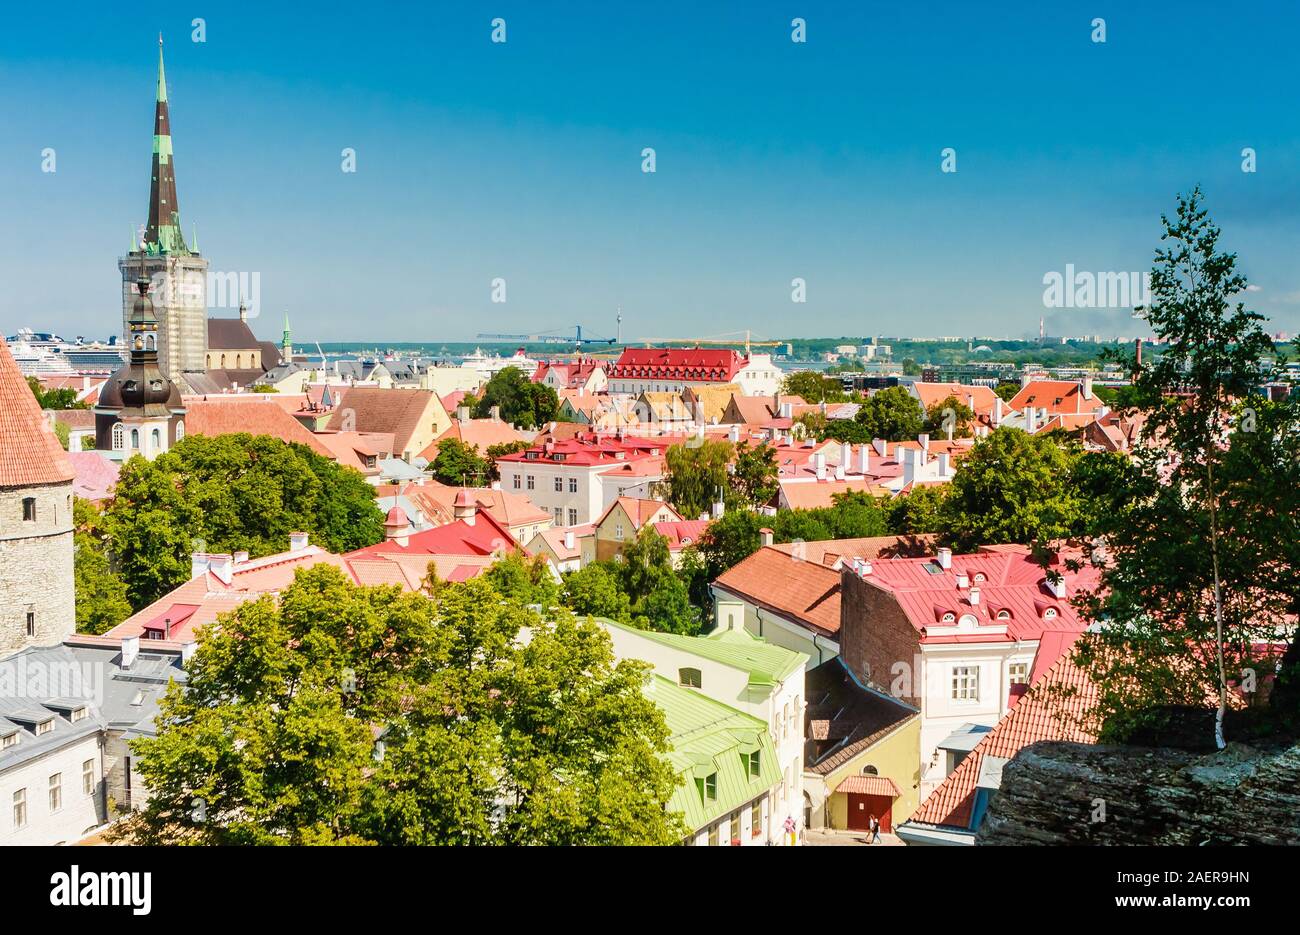 Old buildings at the Old Town, harbor and downtown in Tallinn, Estonia, viewed from above on a sunny day in the summe Stock Photo